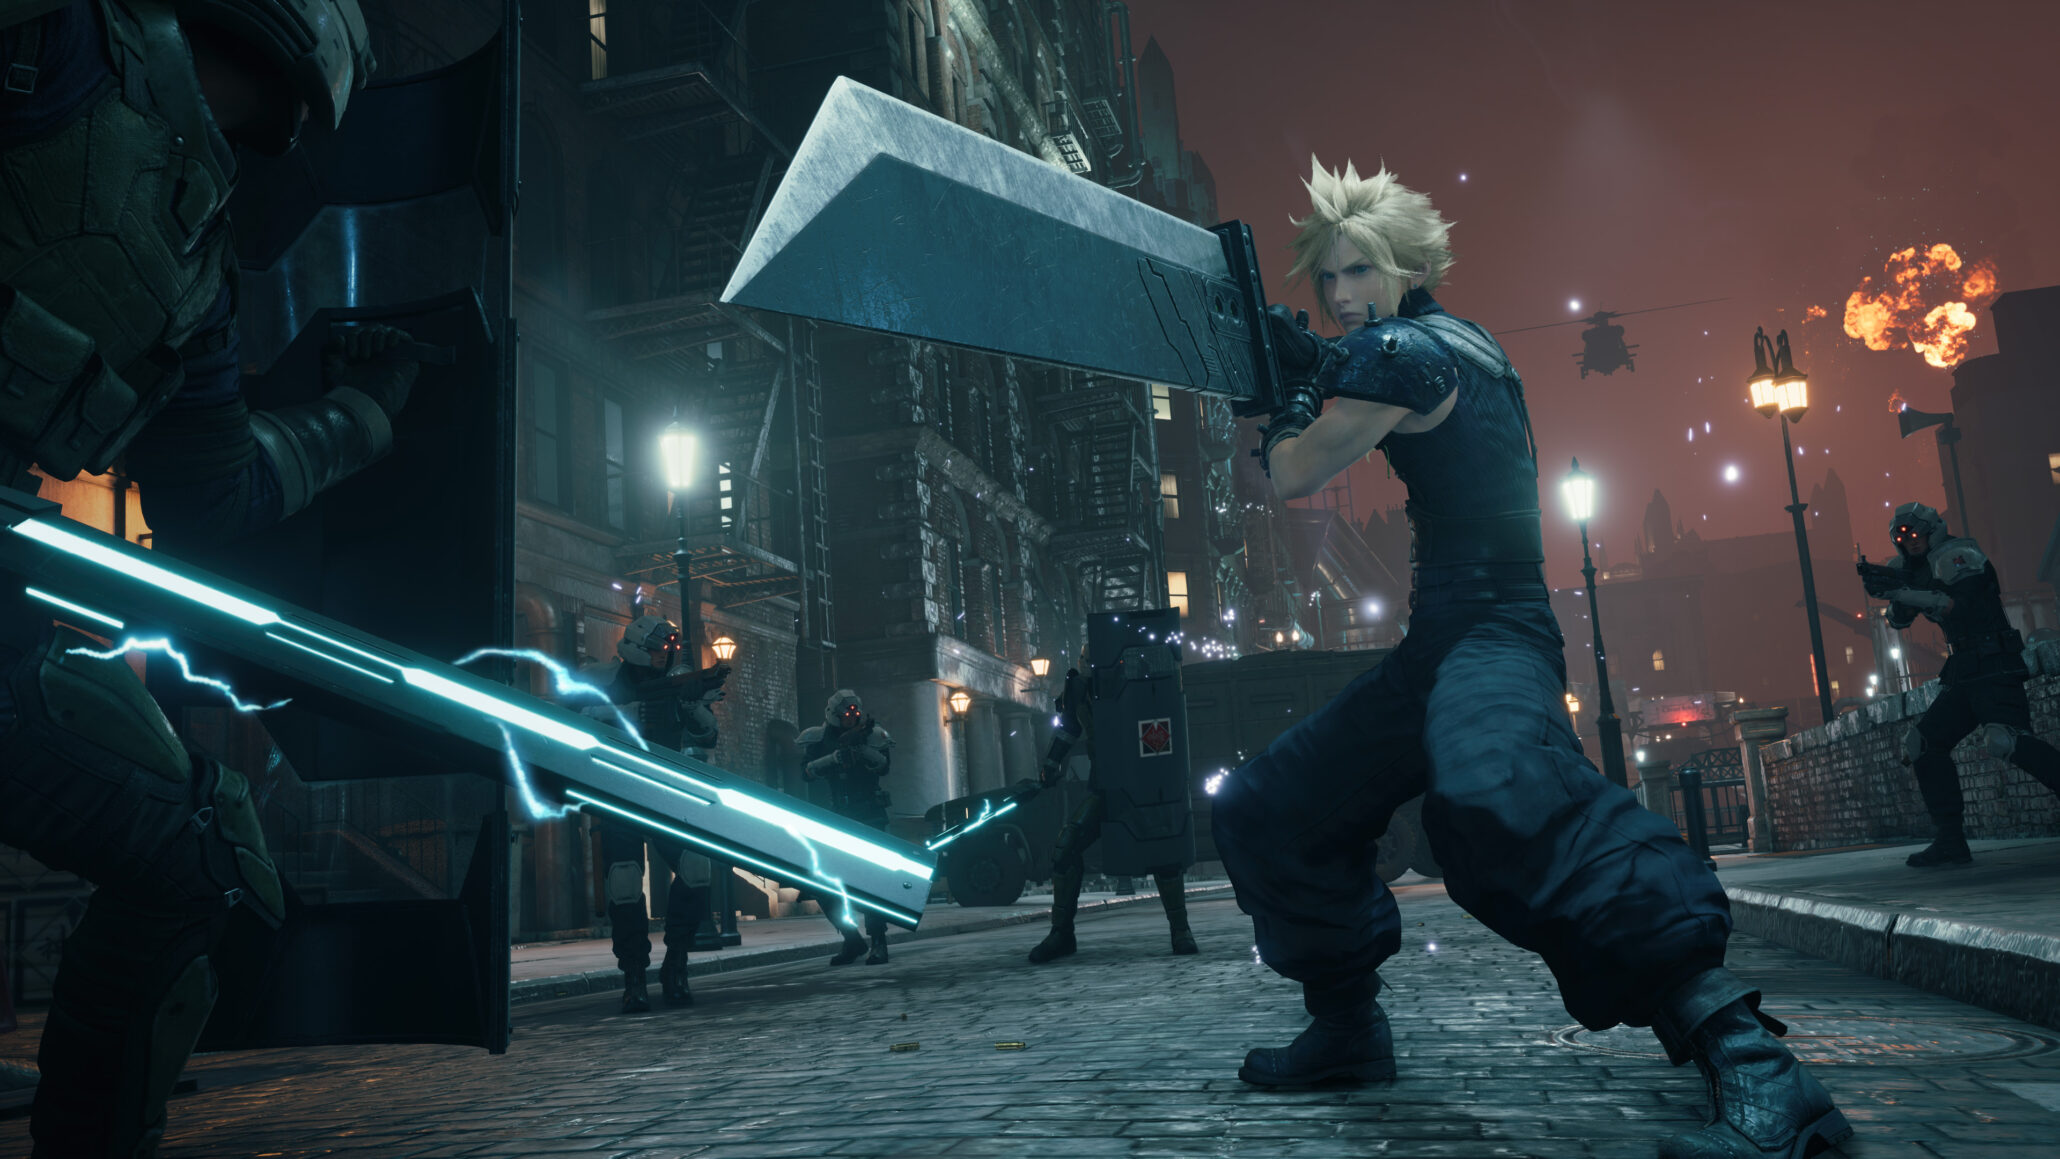 Weapons List - How to Get Every Weapon - Final Fantasy 7 Remake